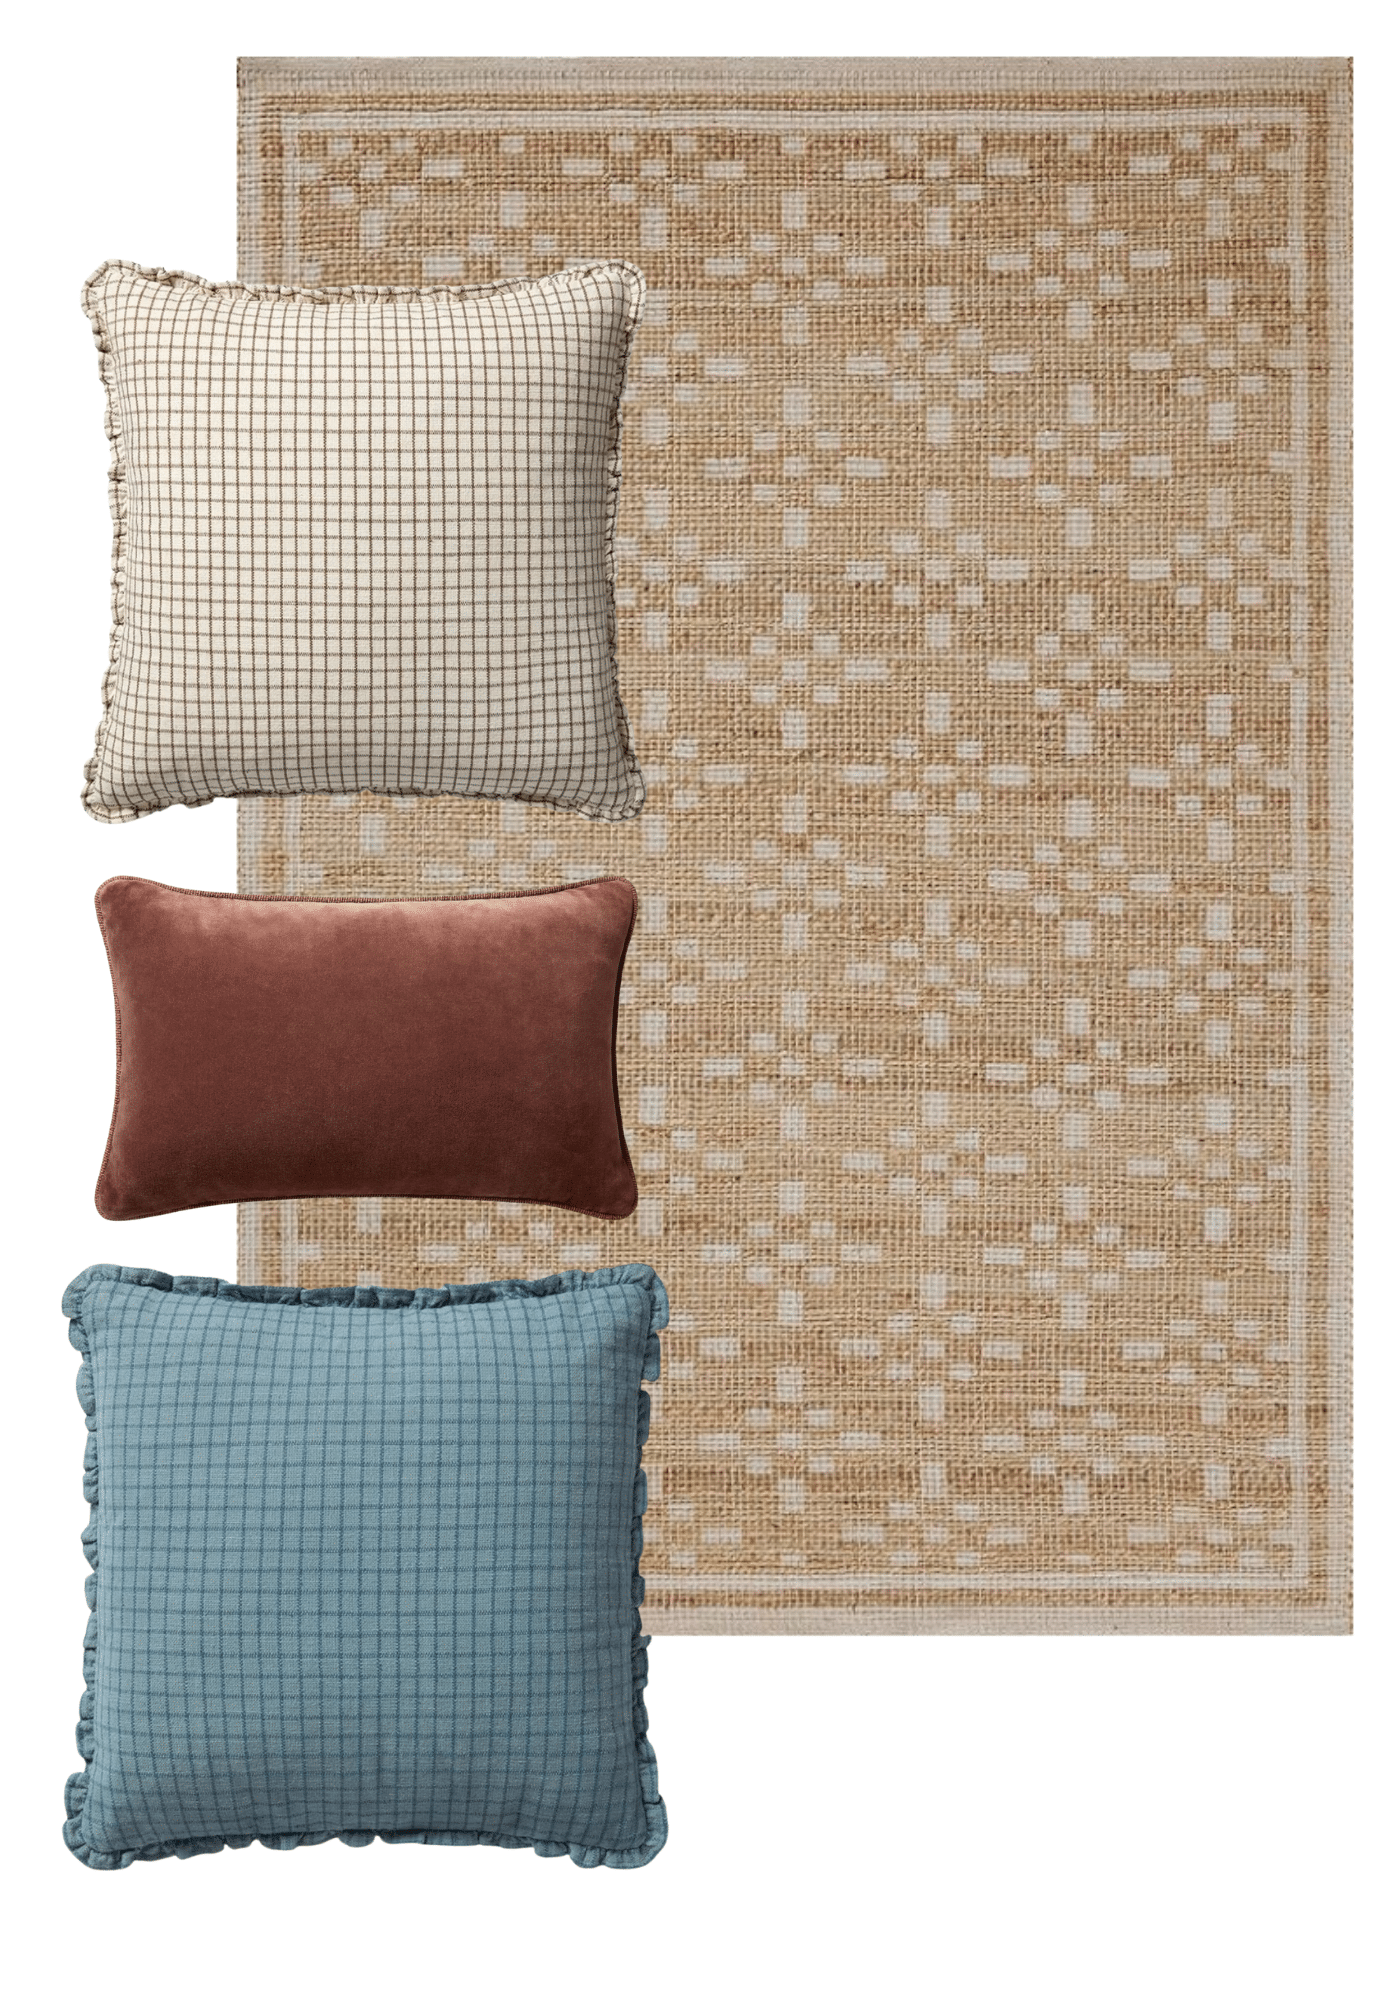 Chris Loves Julia | My Favorite Pillow & Rug Pairings | Judy Rug in Natural Ivory with Pillows